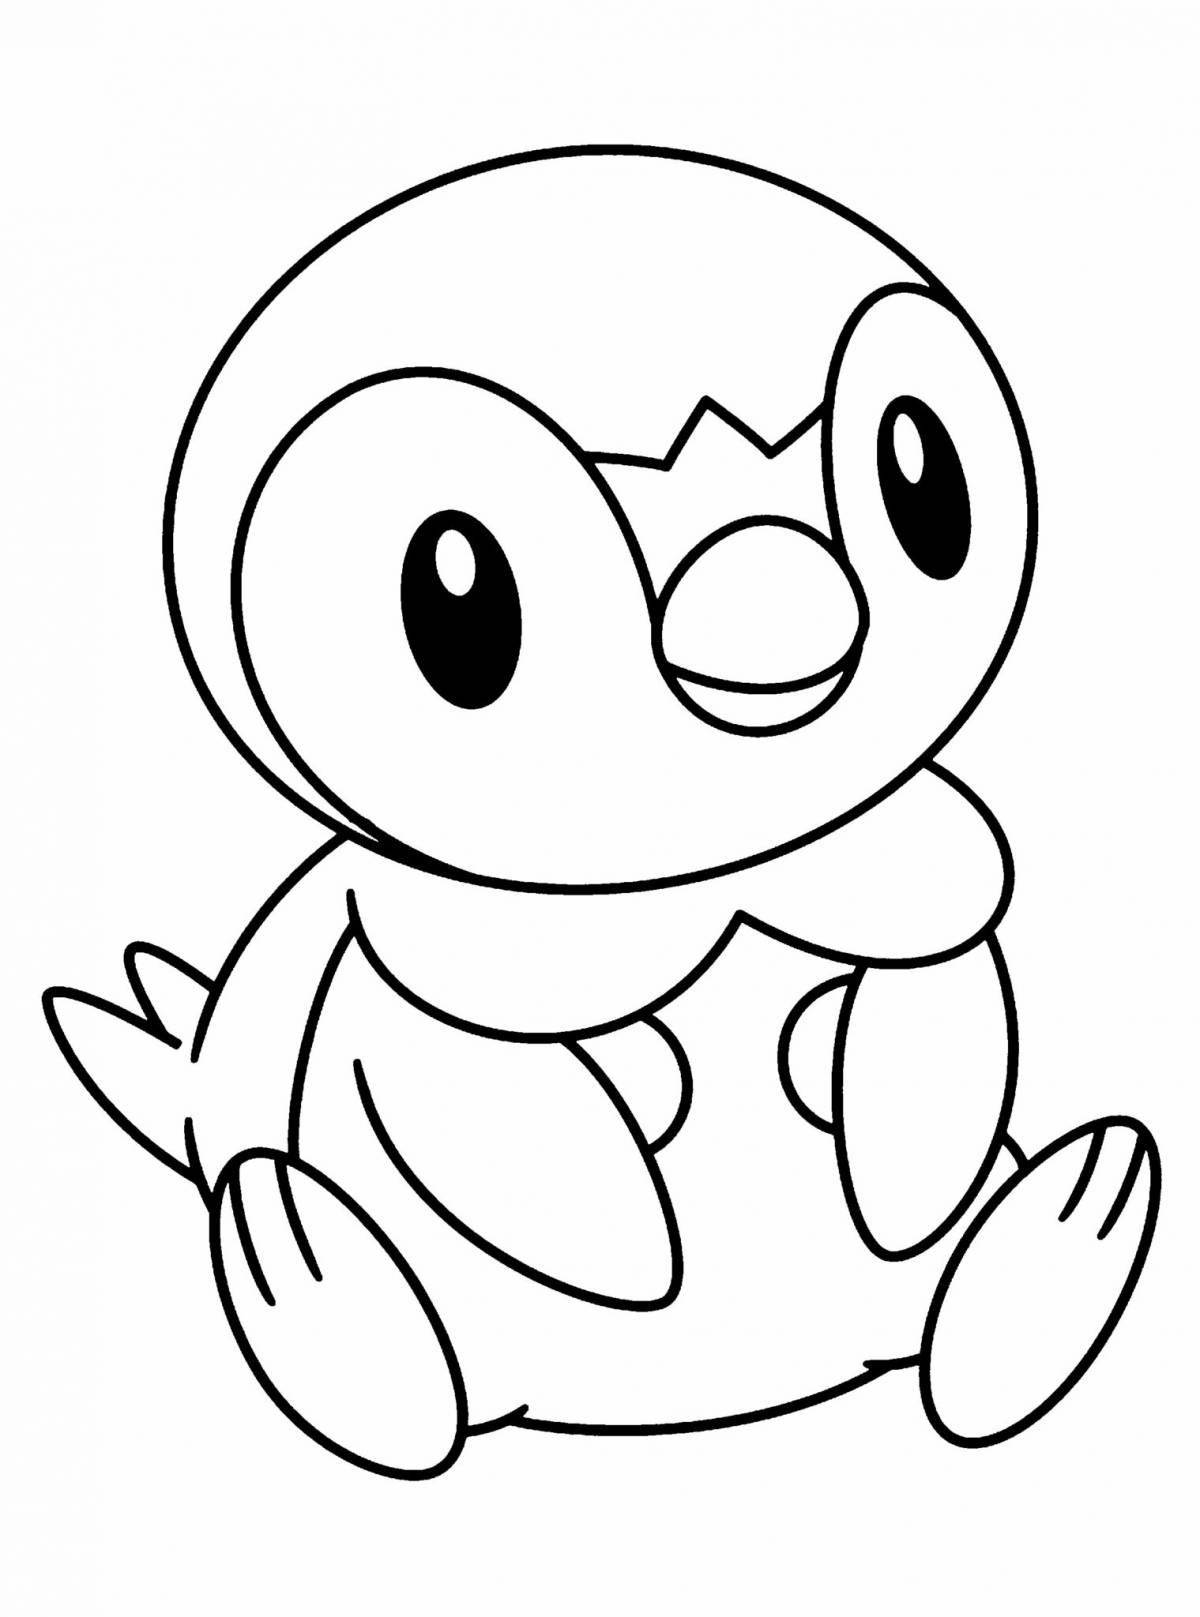 Bright chimchar coloring page